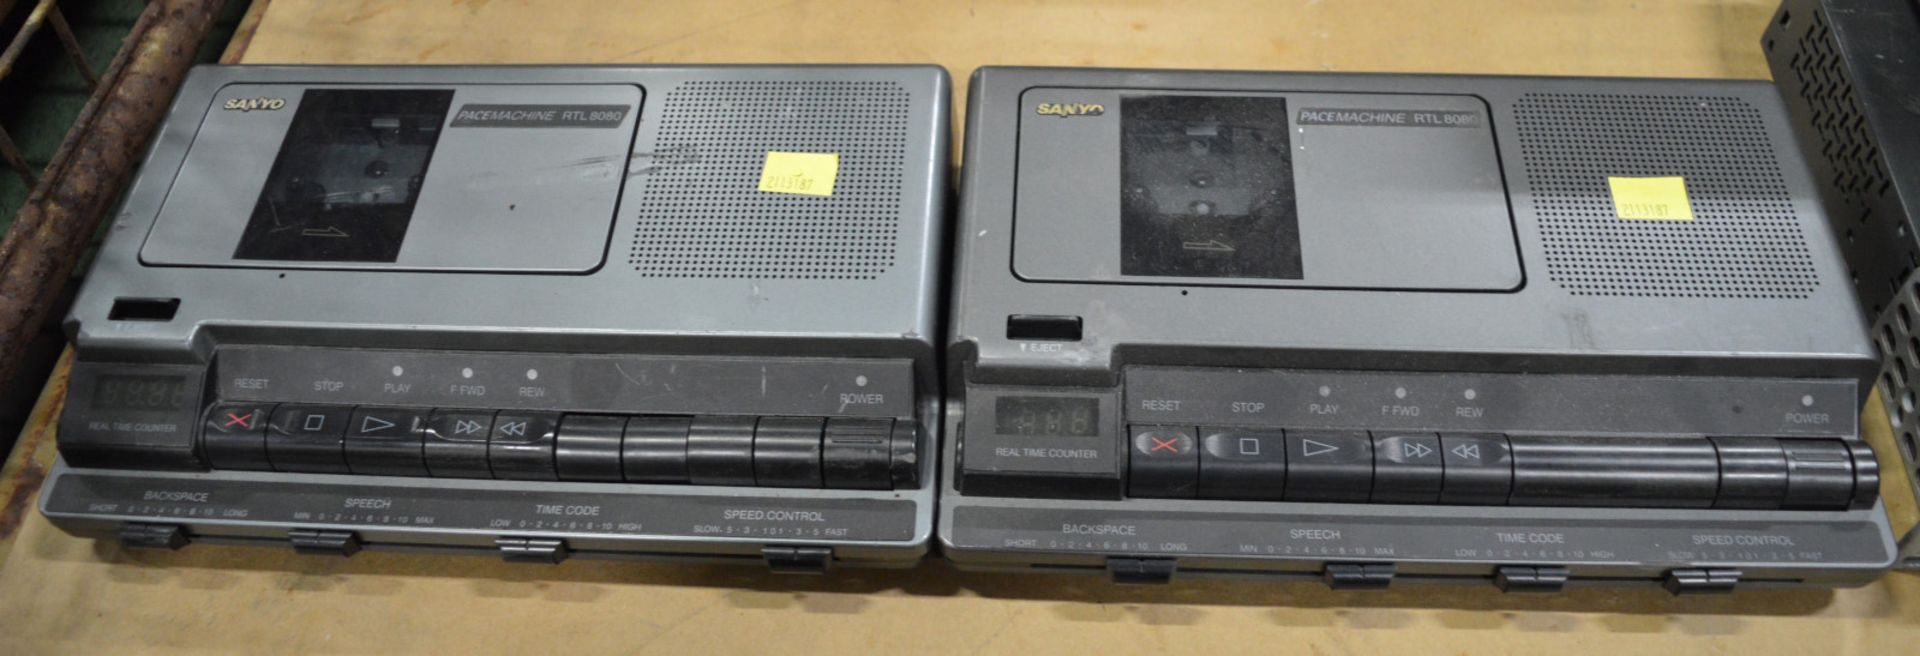 5x Toshiba DVD Video Recorders DR19DT, Naiko DVD, 2x VHS Machines, 2x Sanyo Pacemachine RT - Image 4 of 5